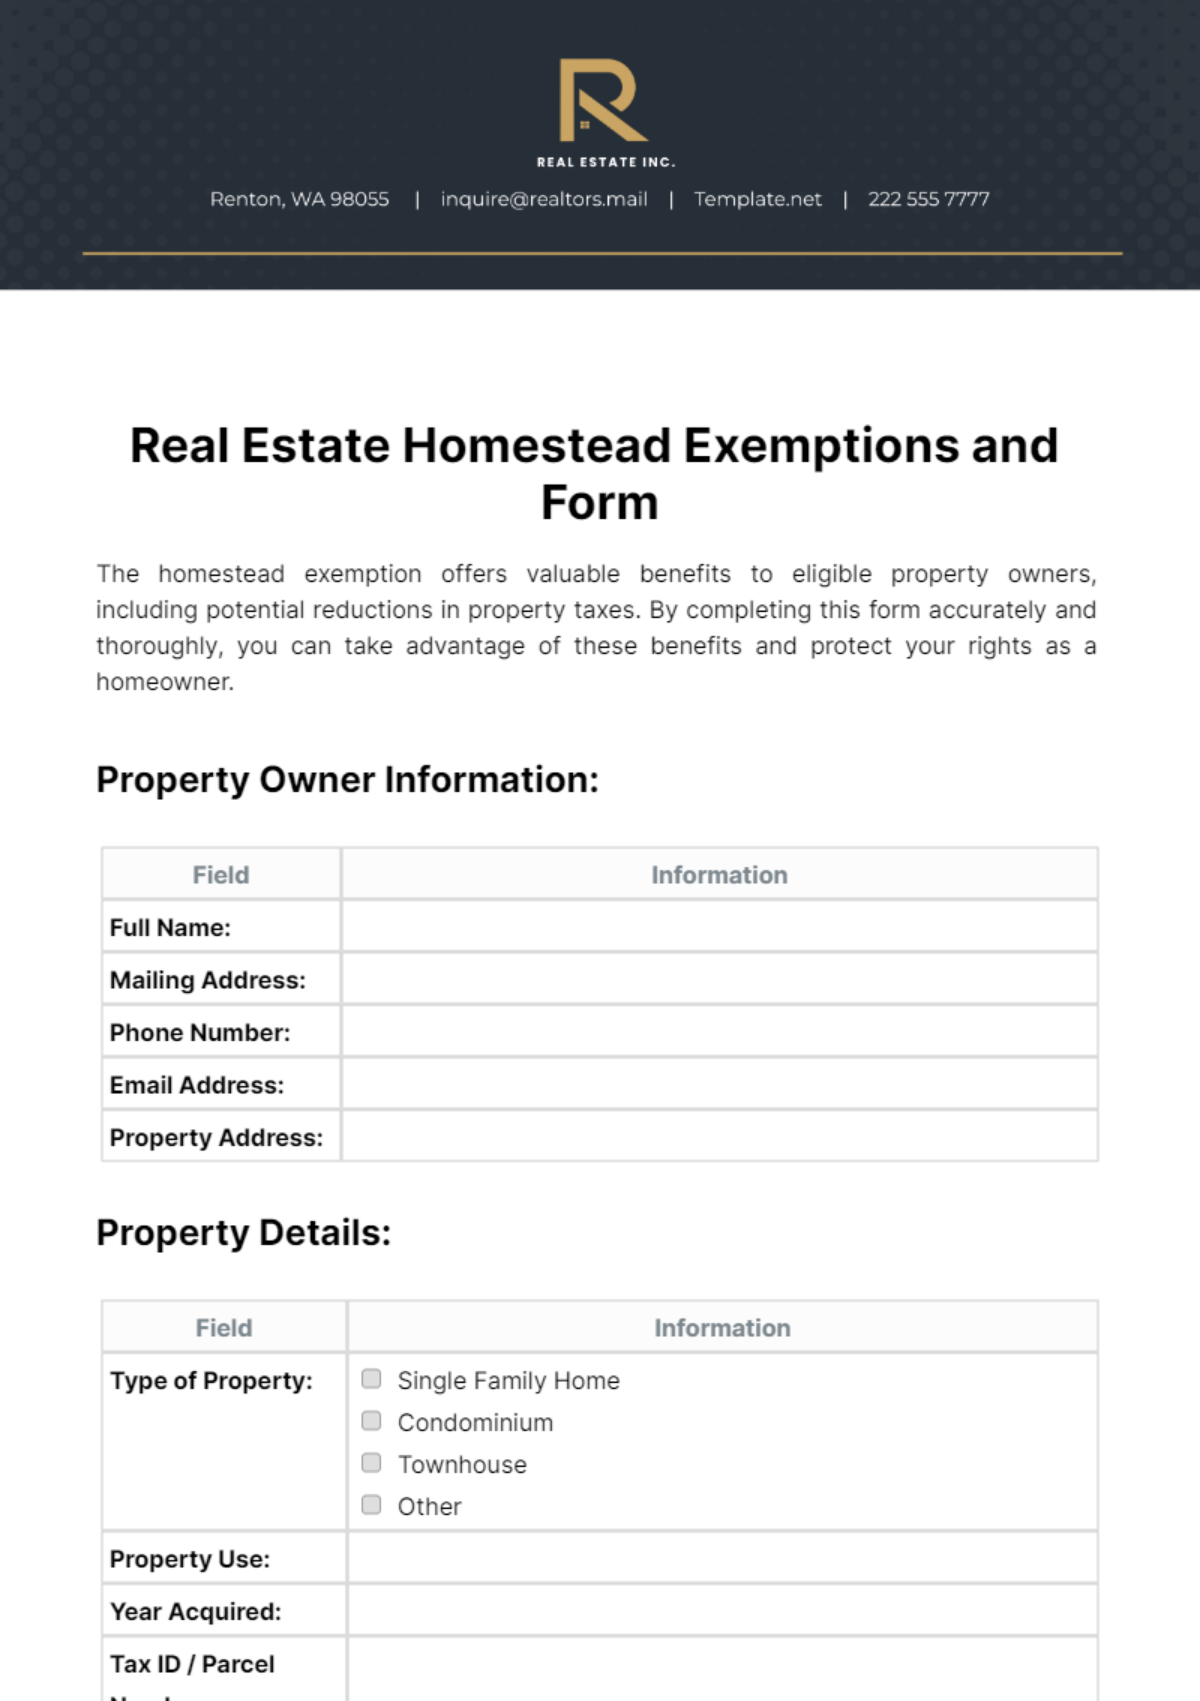 Real Estate Homestead Exemptions and Form Template